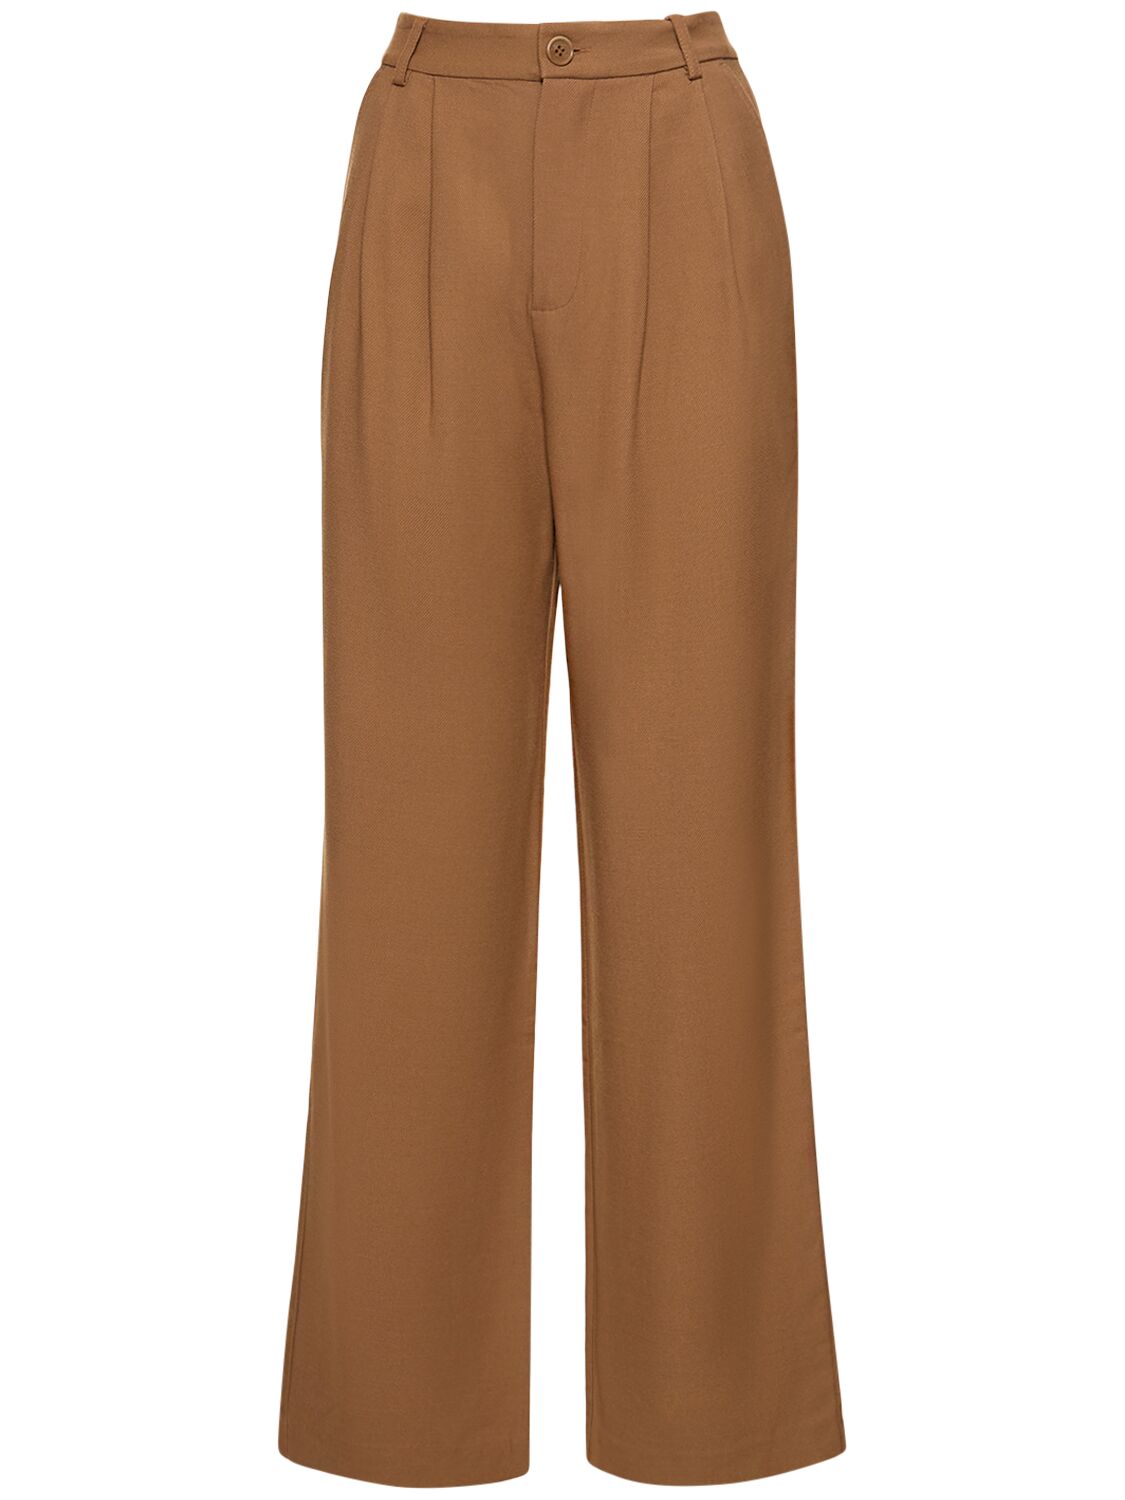 Image of Carrie Viscose Blend Twill Pants